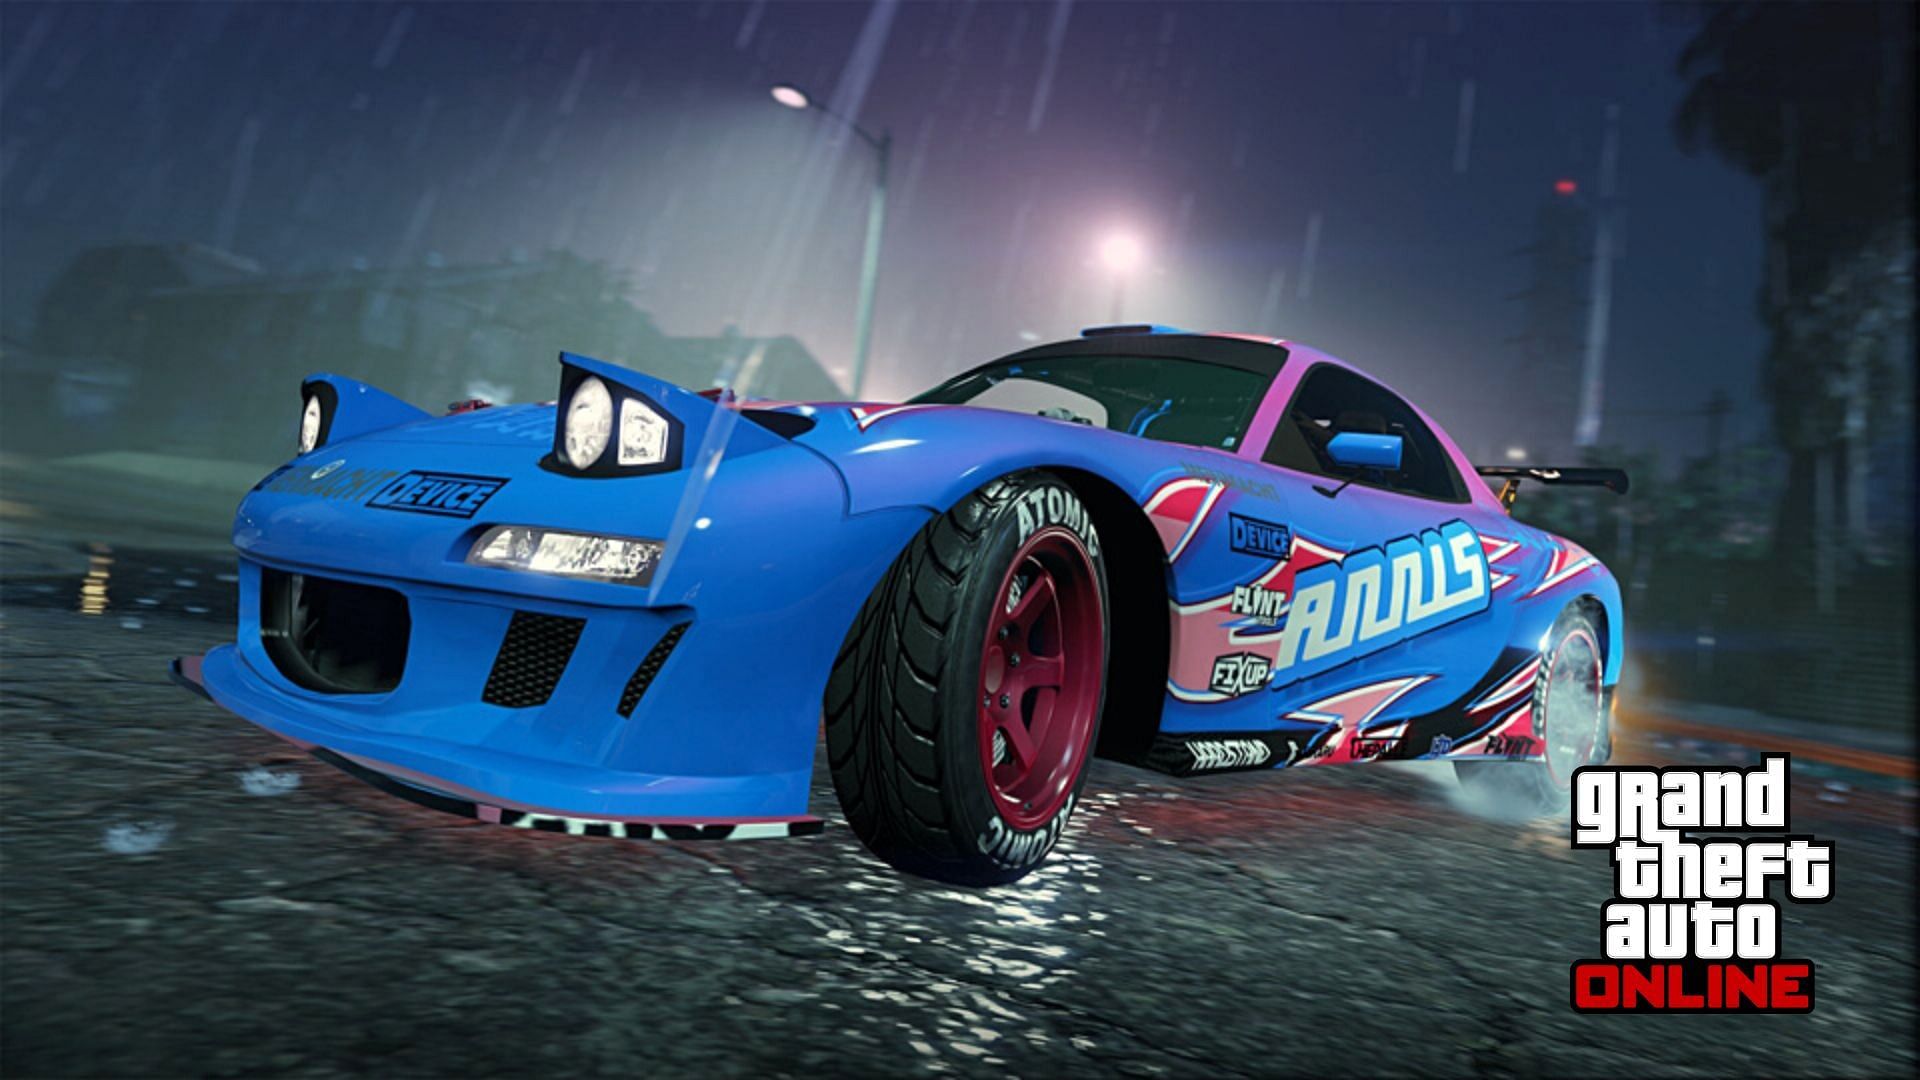 A brief about the Annis ZR350 in GTA Online that players must know about (Image via Rockstar Games))